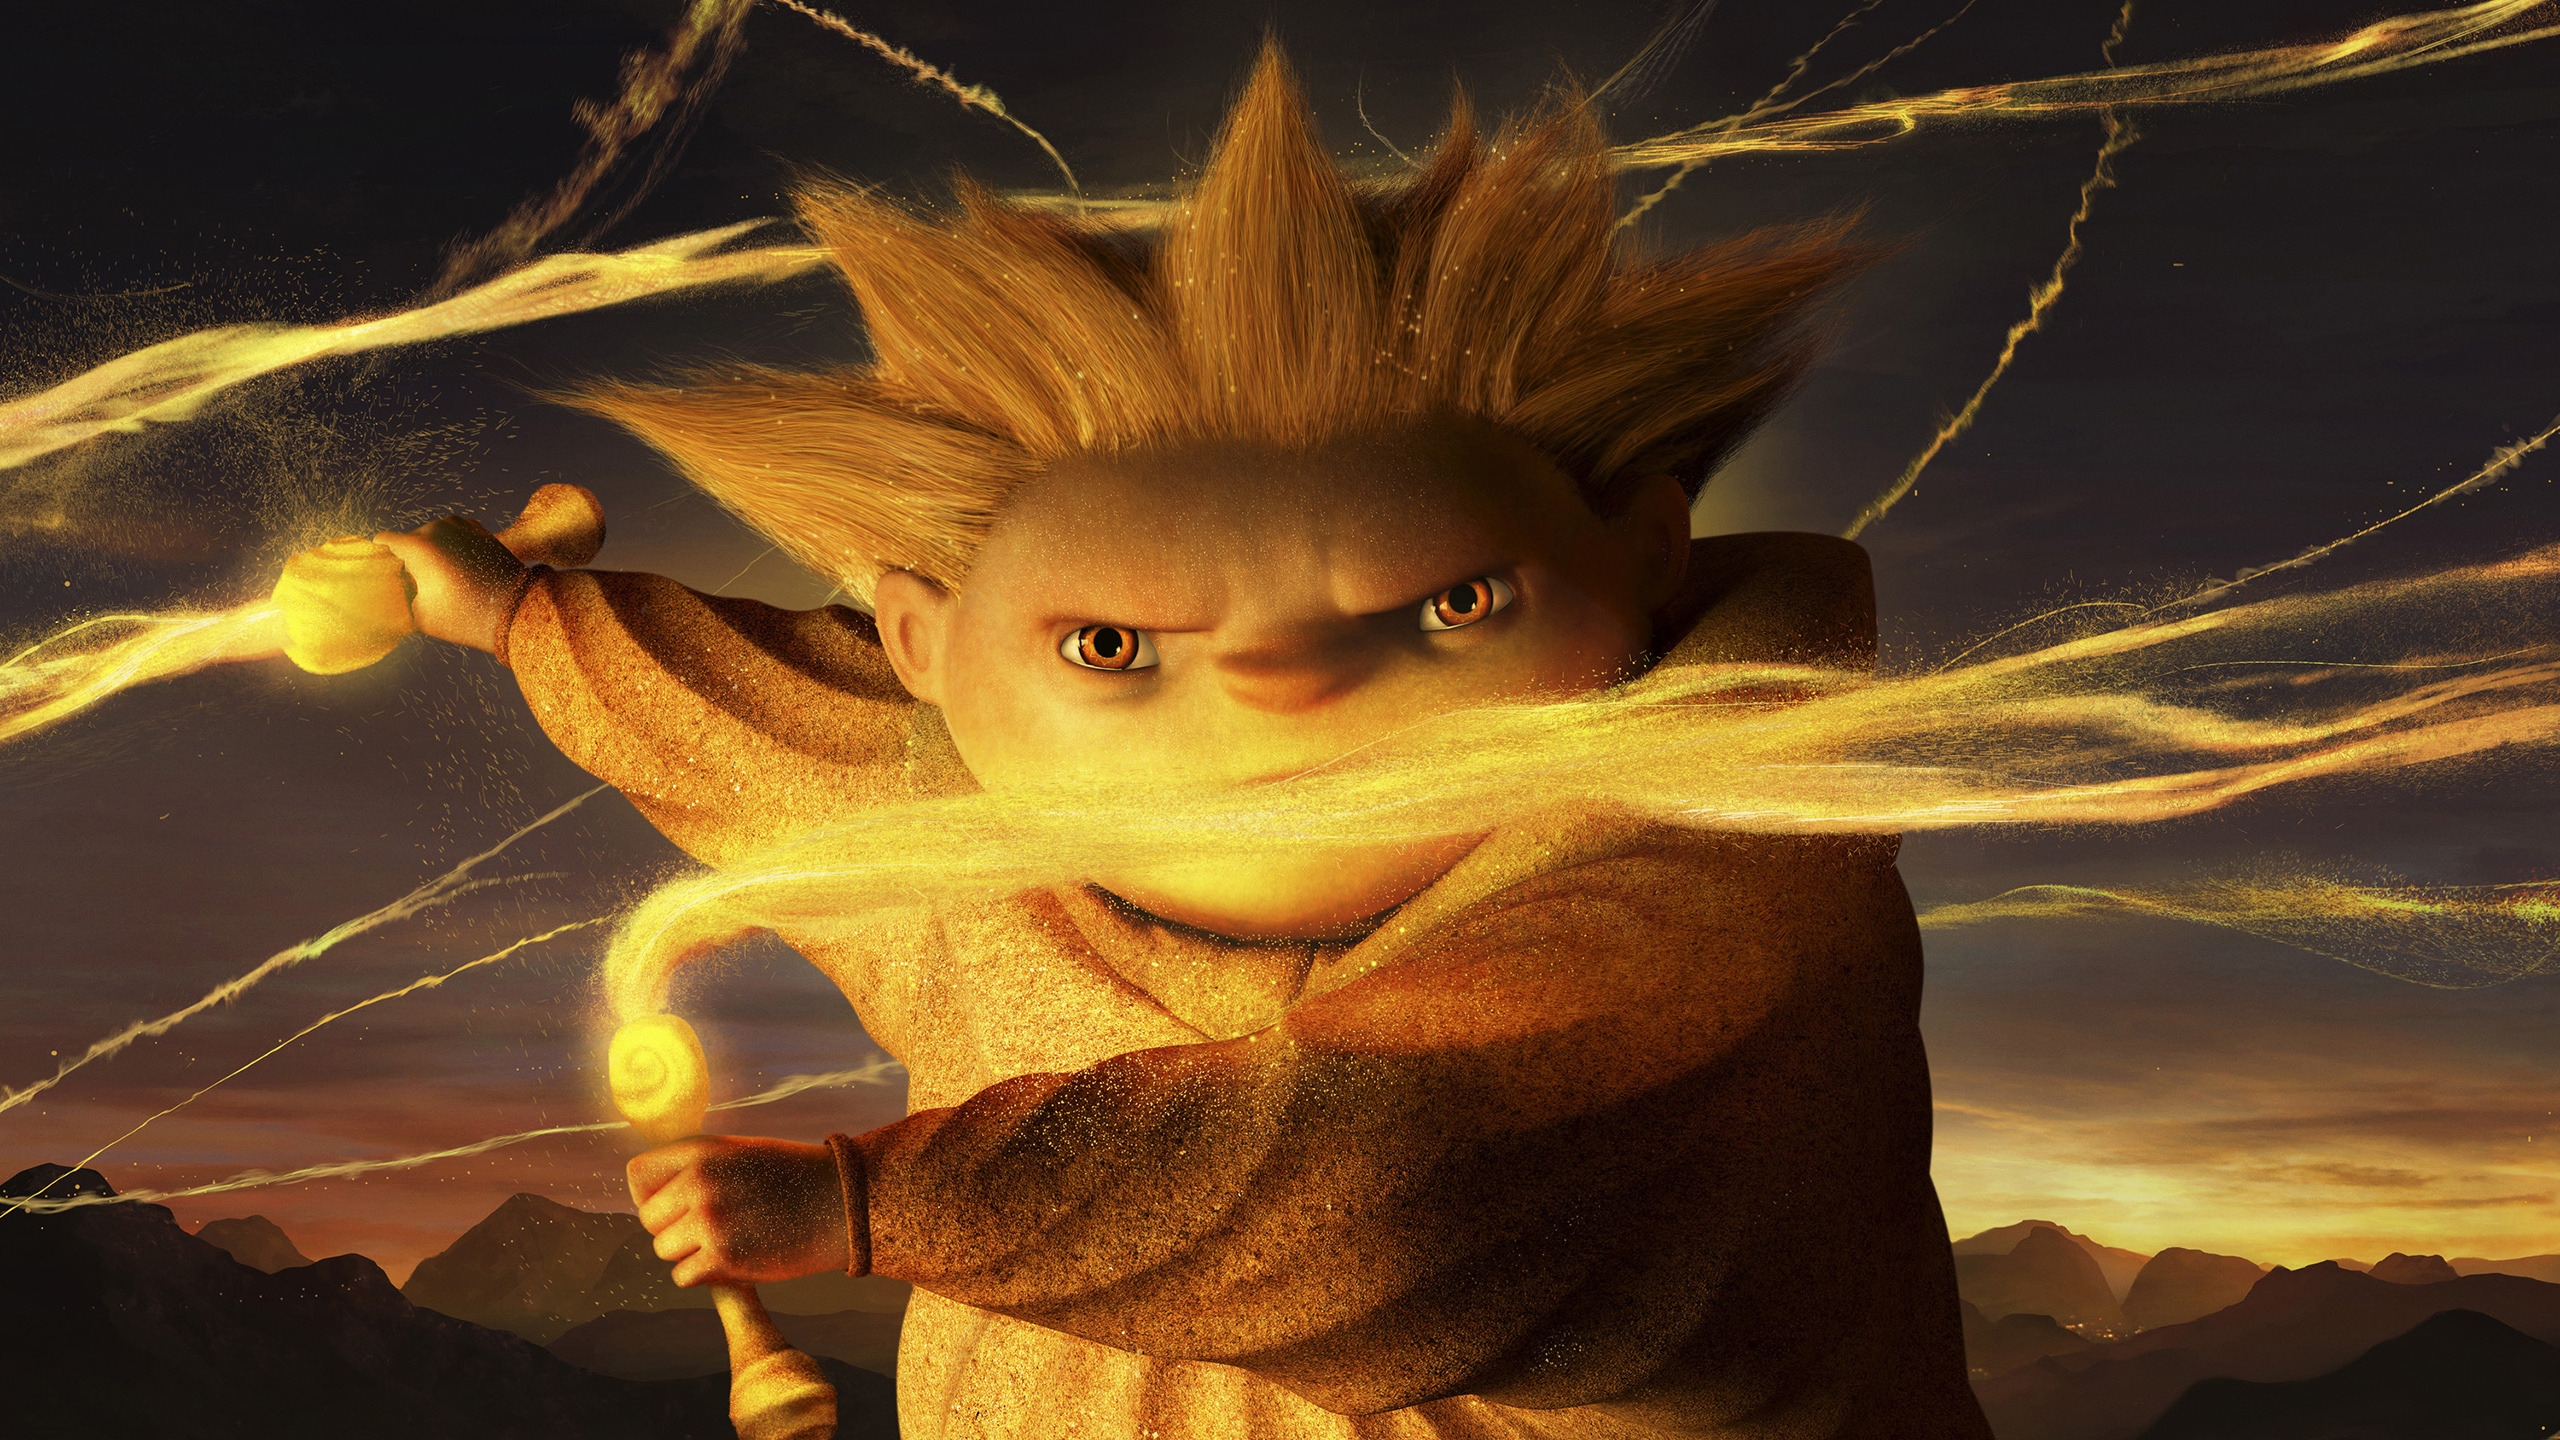 The Sandman Rise Of The Guardians for 2560x1440 HDTV resolution